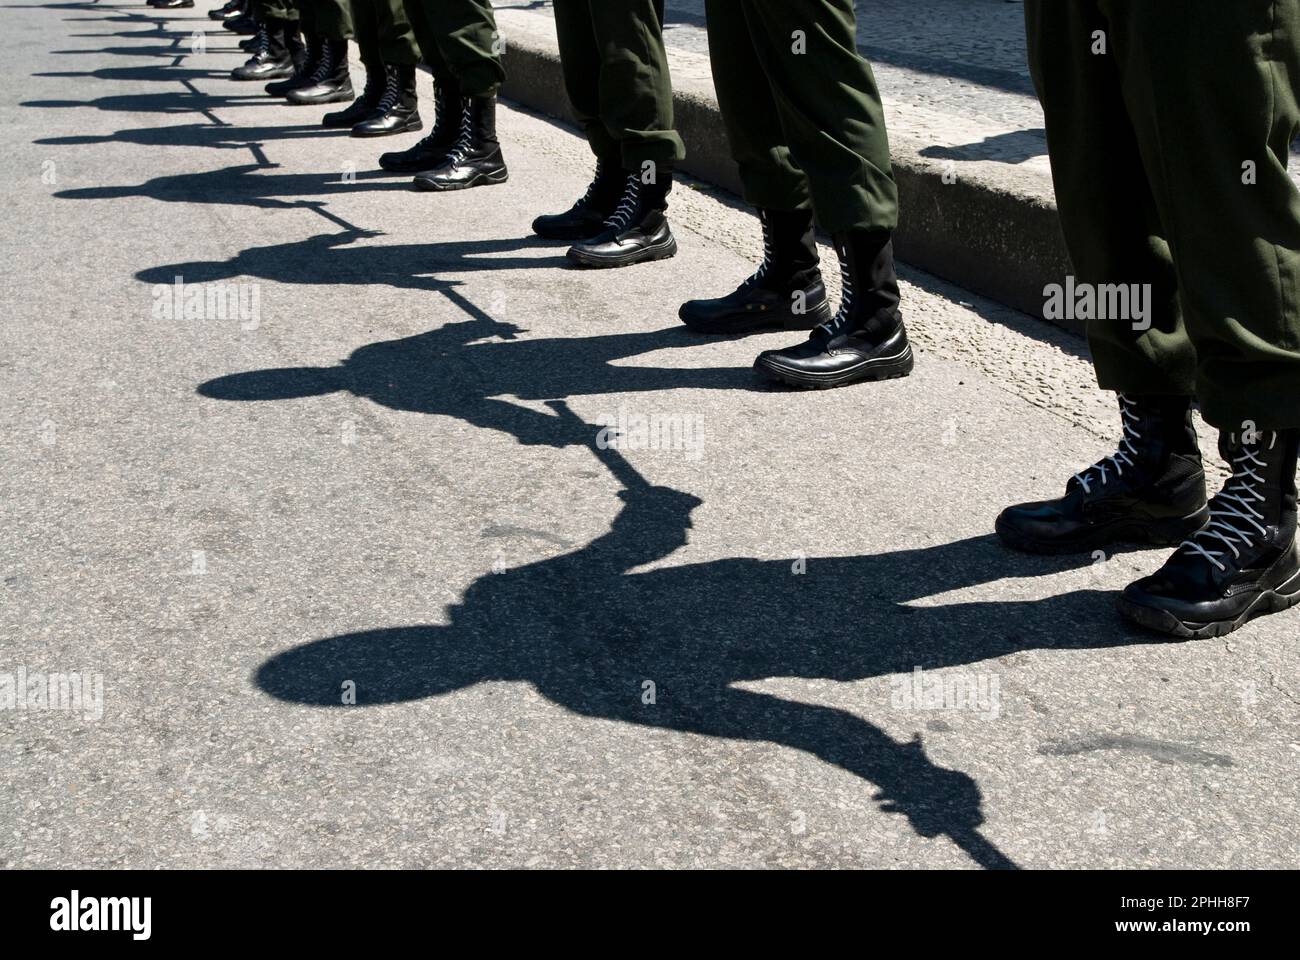 Formation of a military kettling for controlling the crowd during a protest. Rio de Janeiro, Brazil. Stock Photo